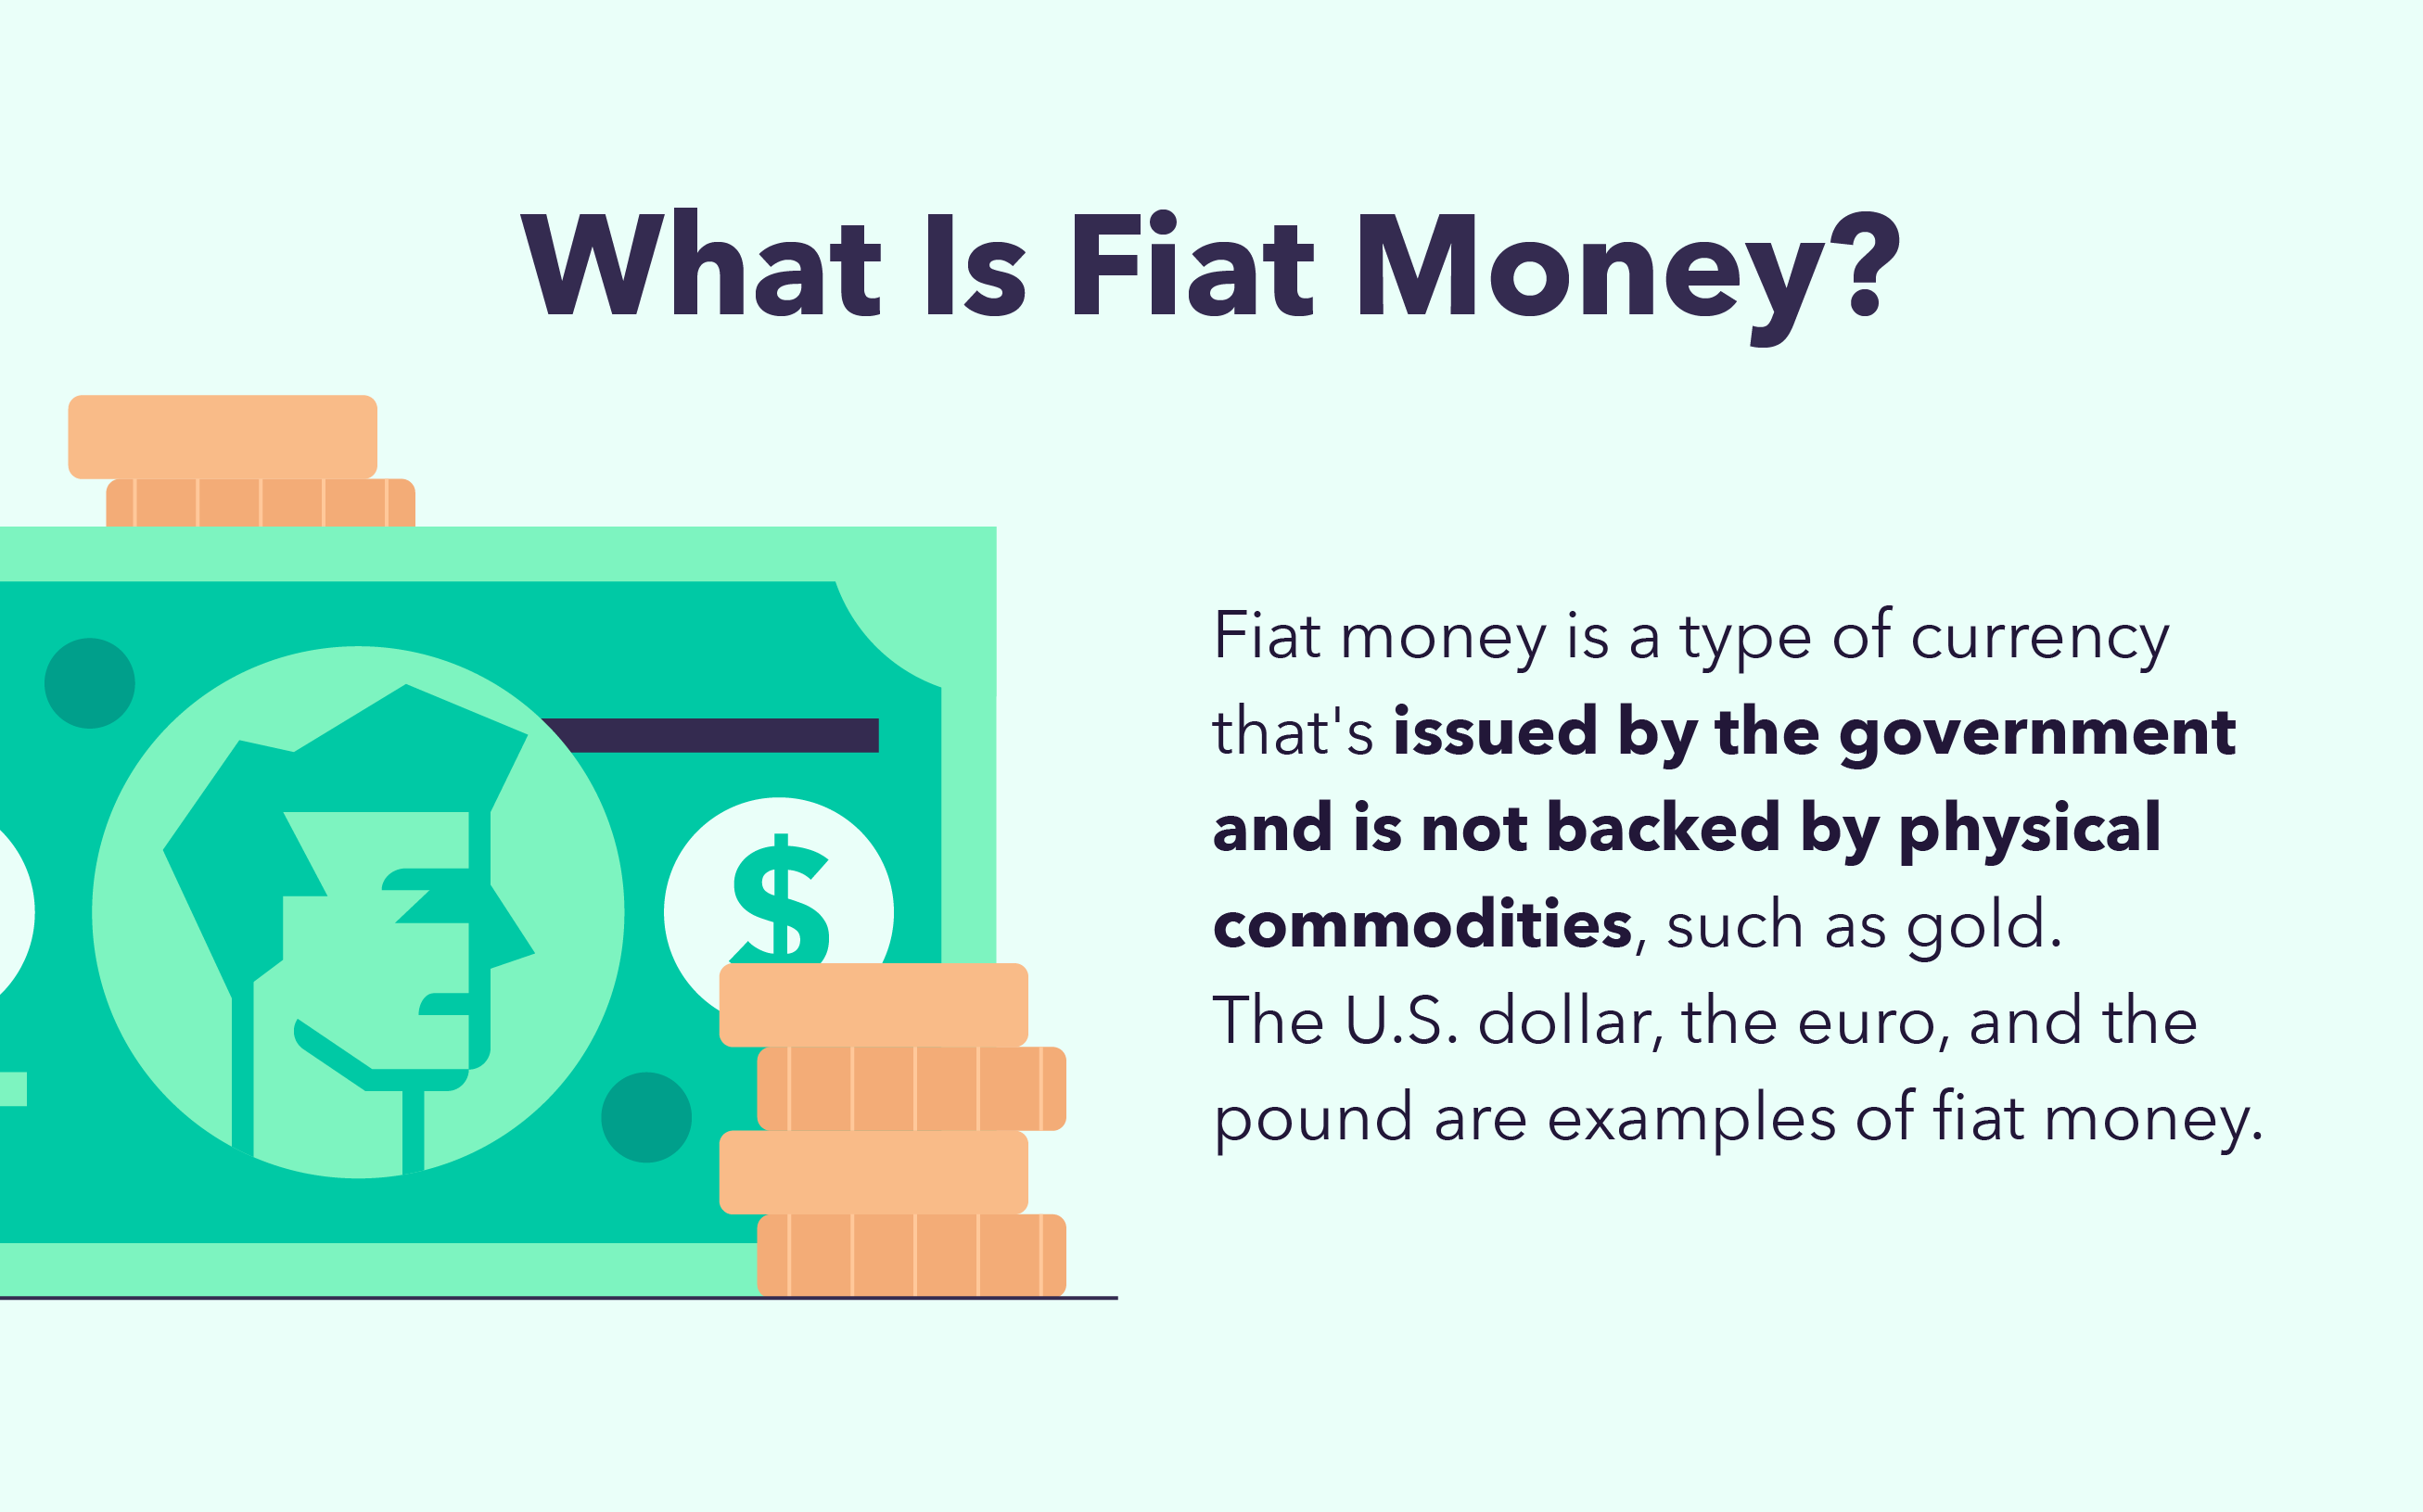 A graphic answers the question “what is fiat money,” which is a type of currency issued by the government and not backed by a physical commodity.